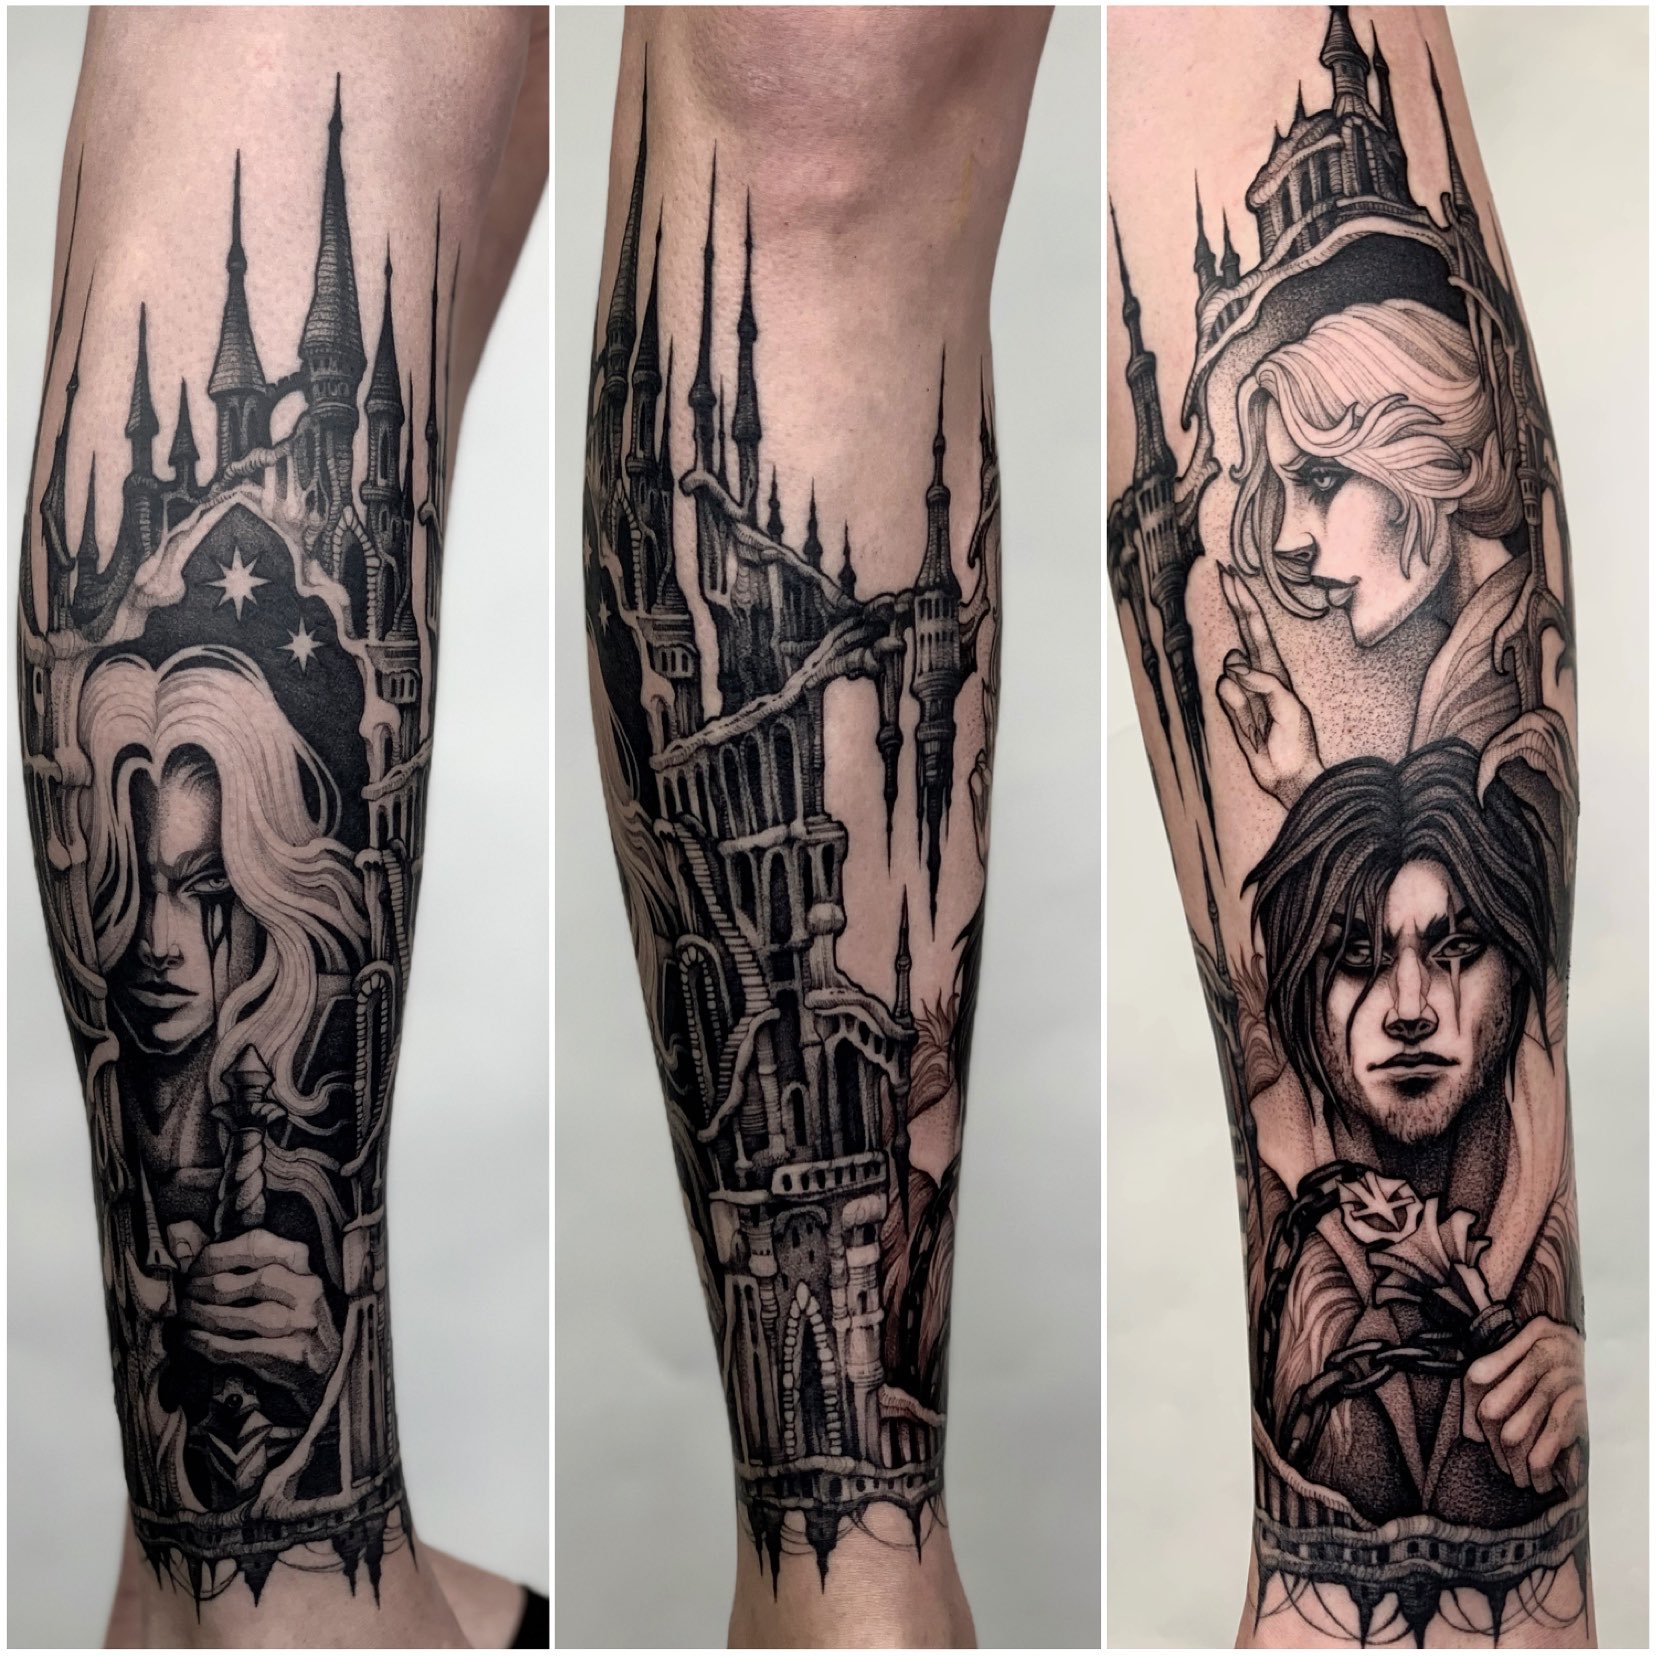 Decided to dedicate my 3rd tattoo to my favorite video game franchise  r castlevania